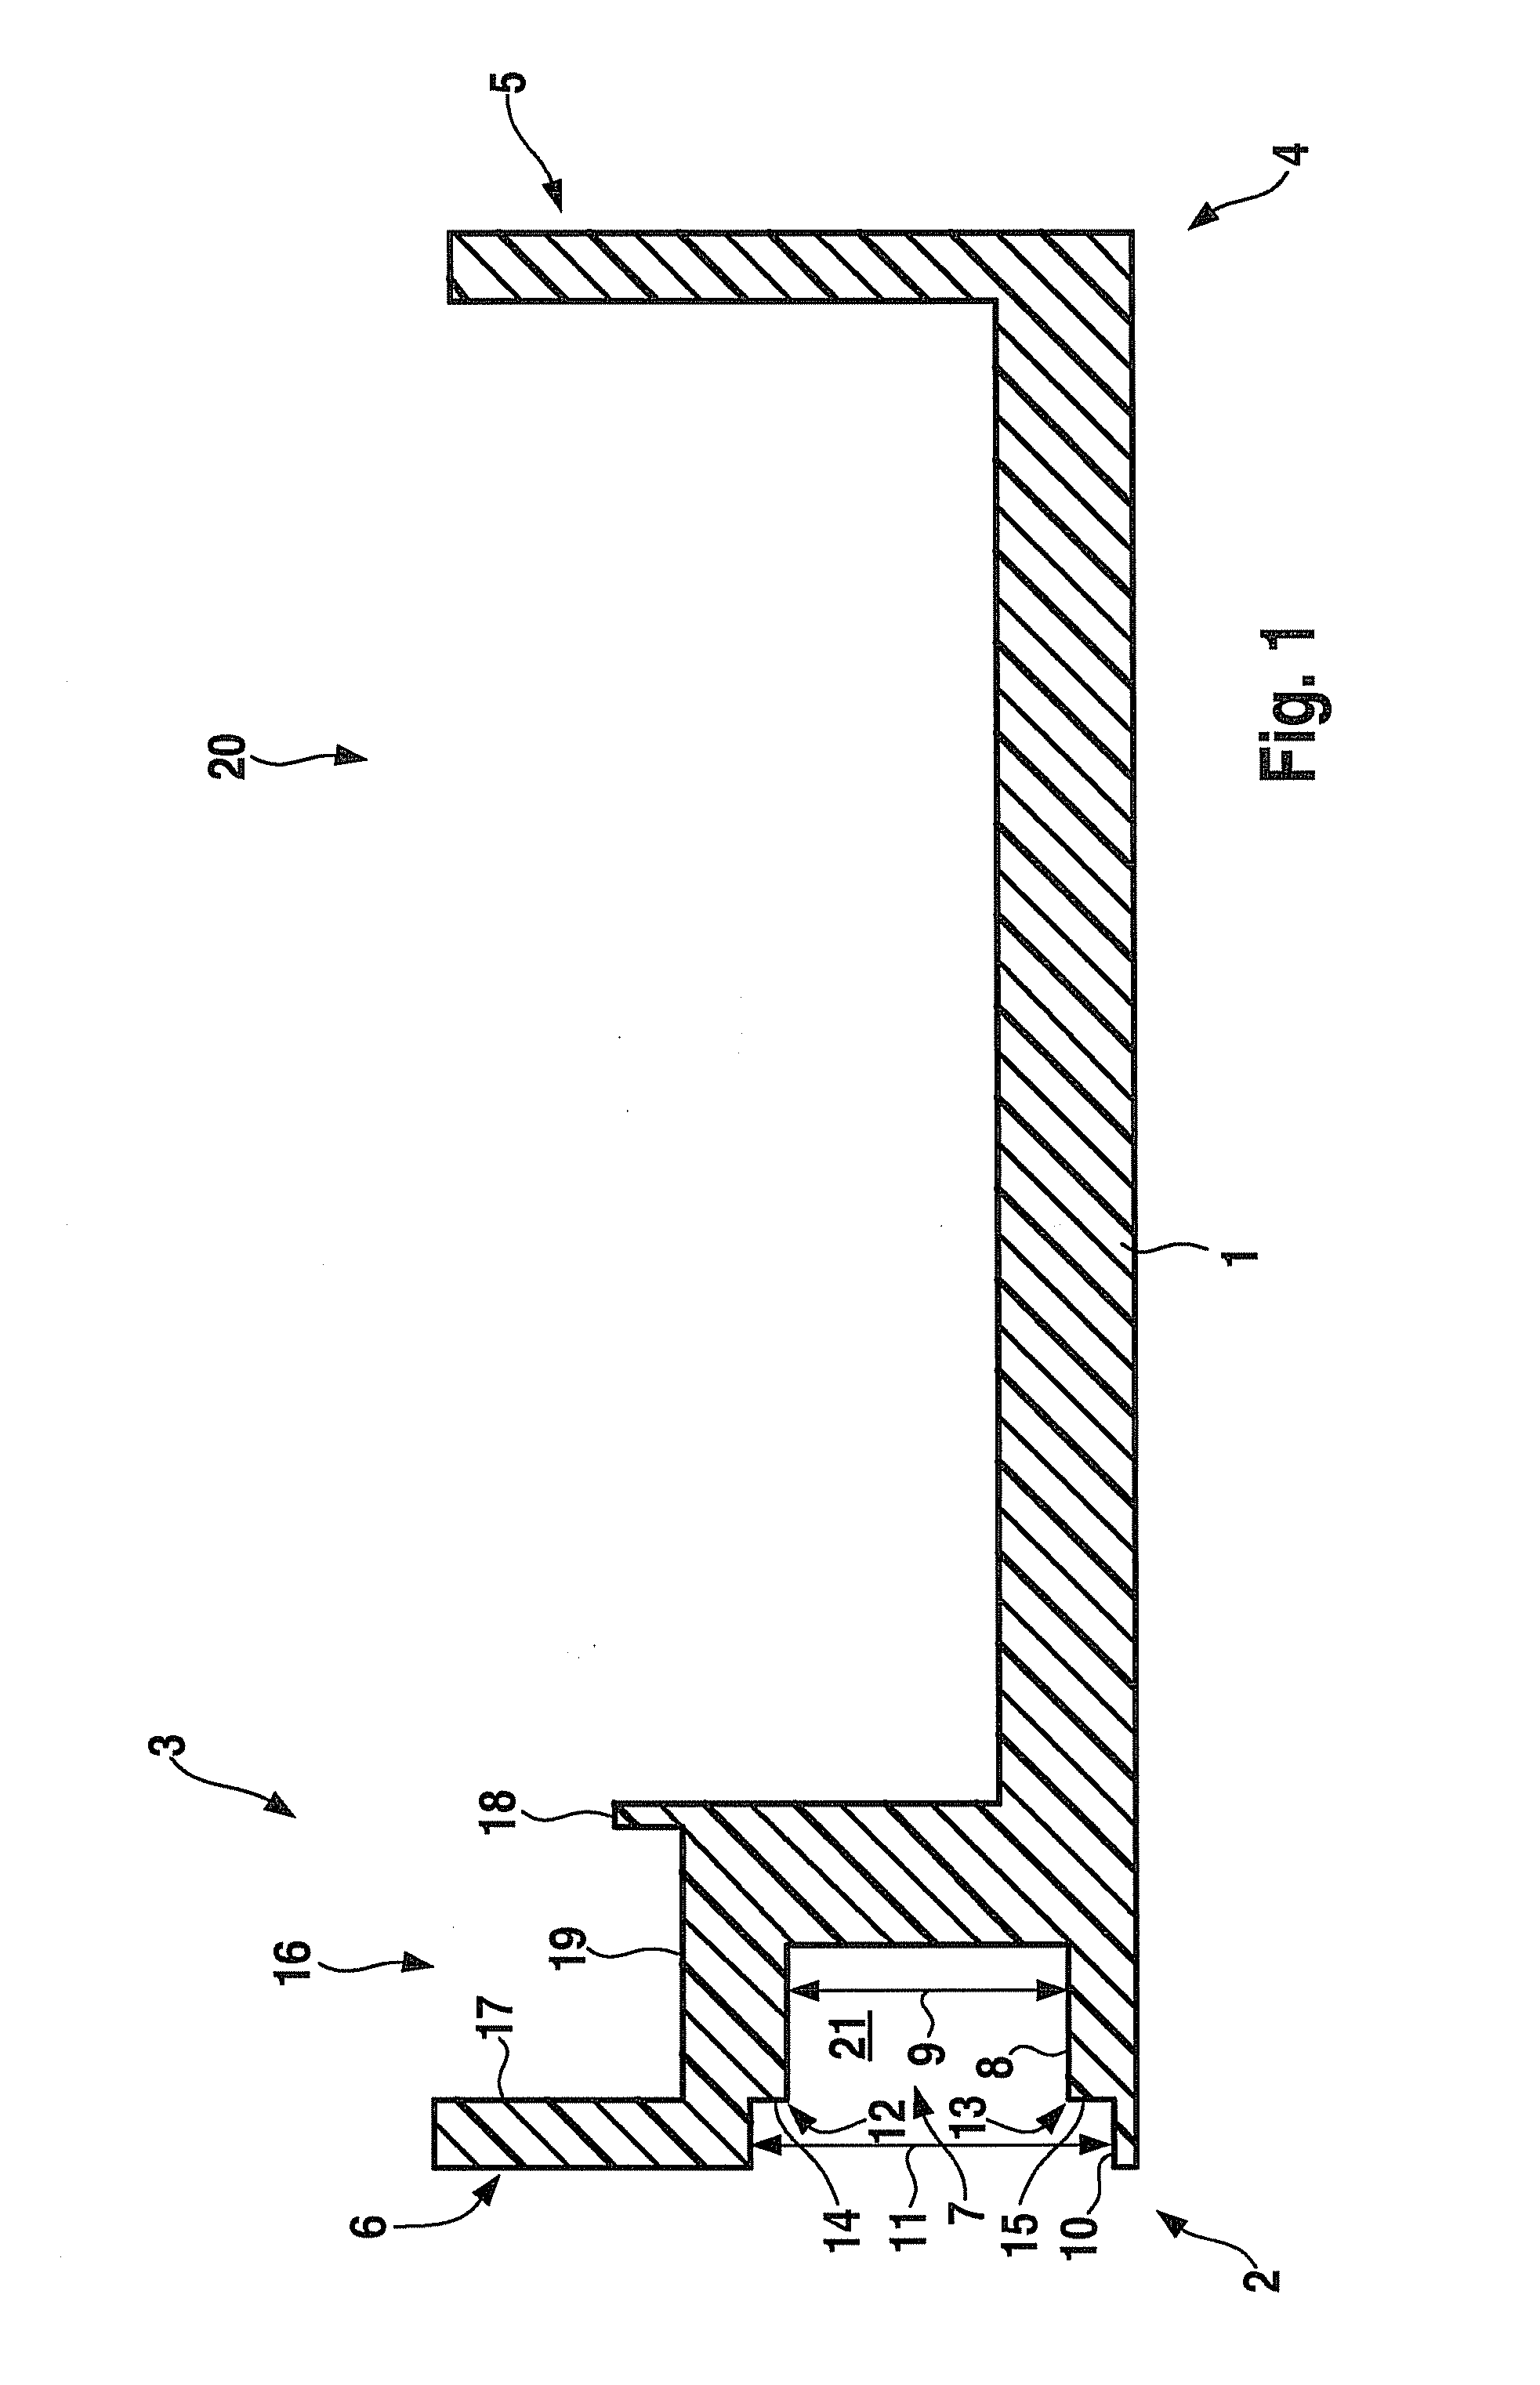 Coil configuration having a coil brace of an electromagnetic drive